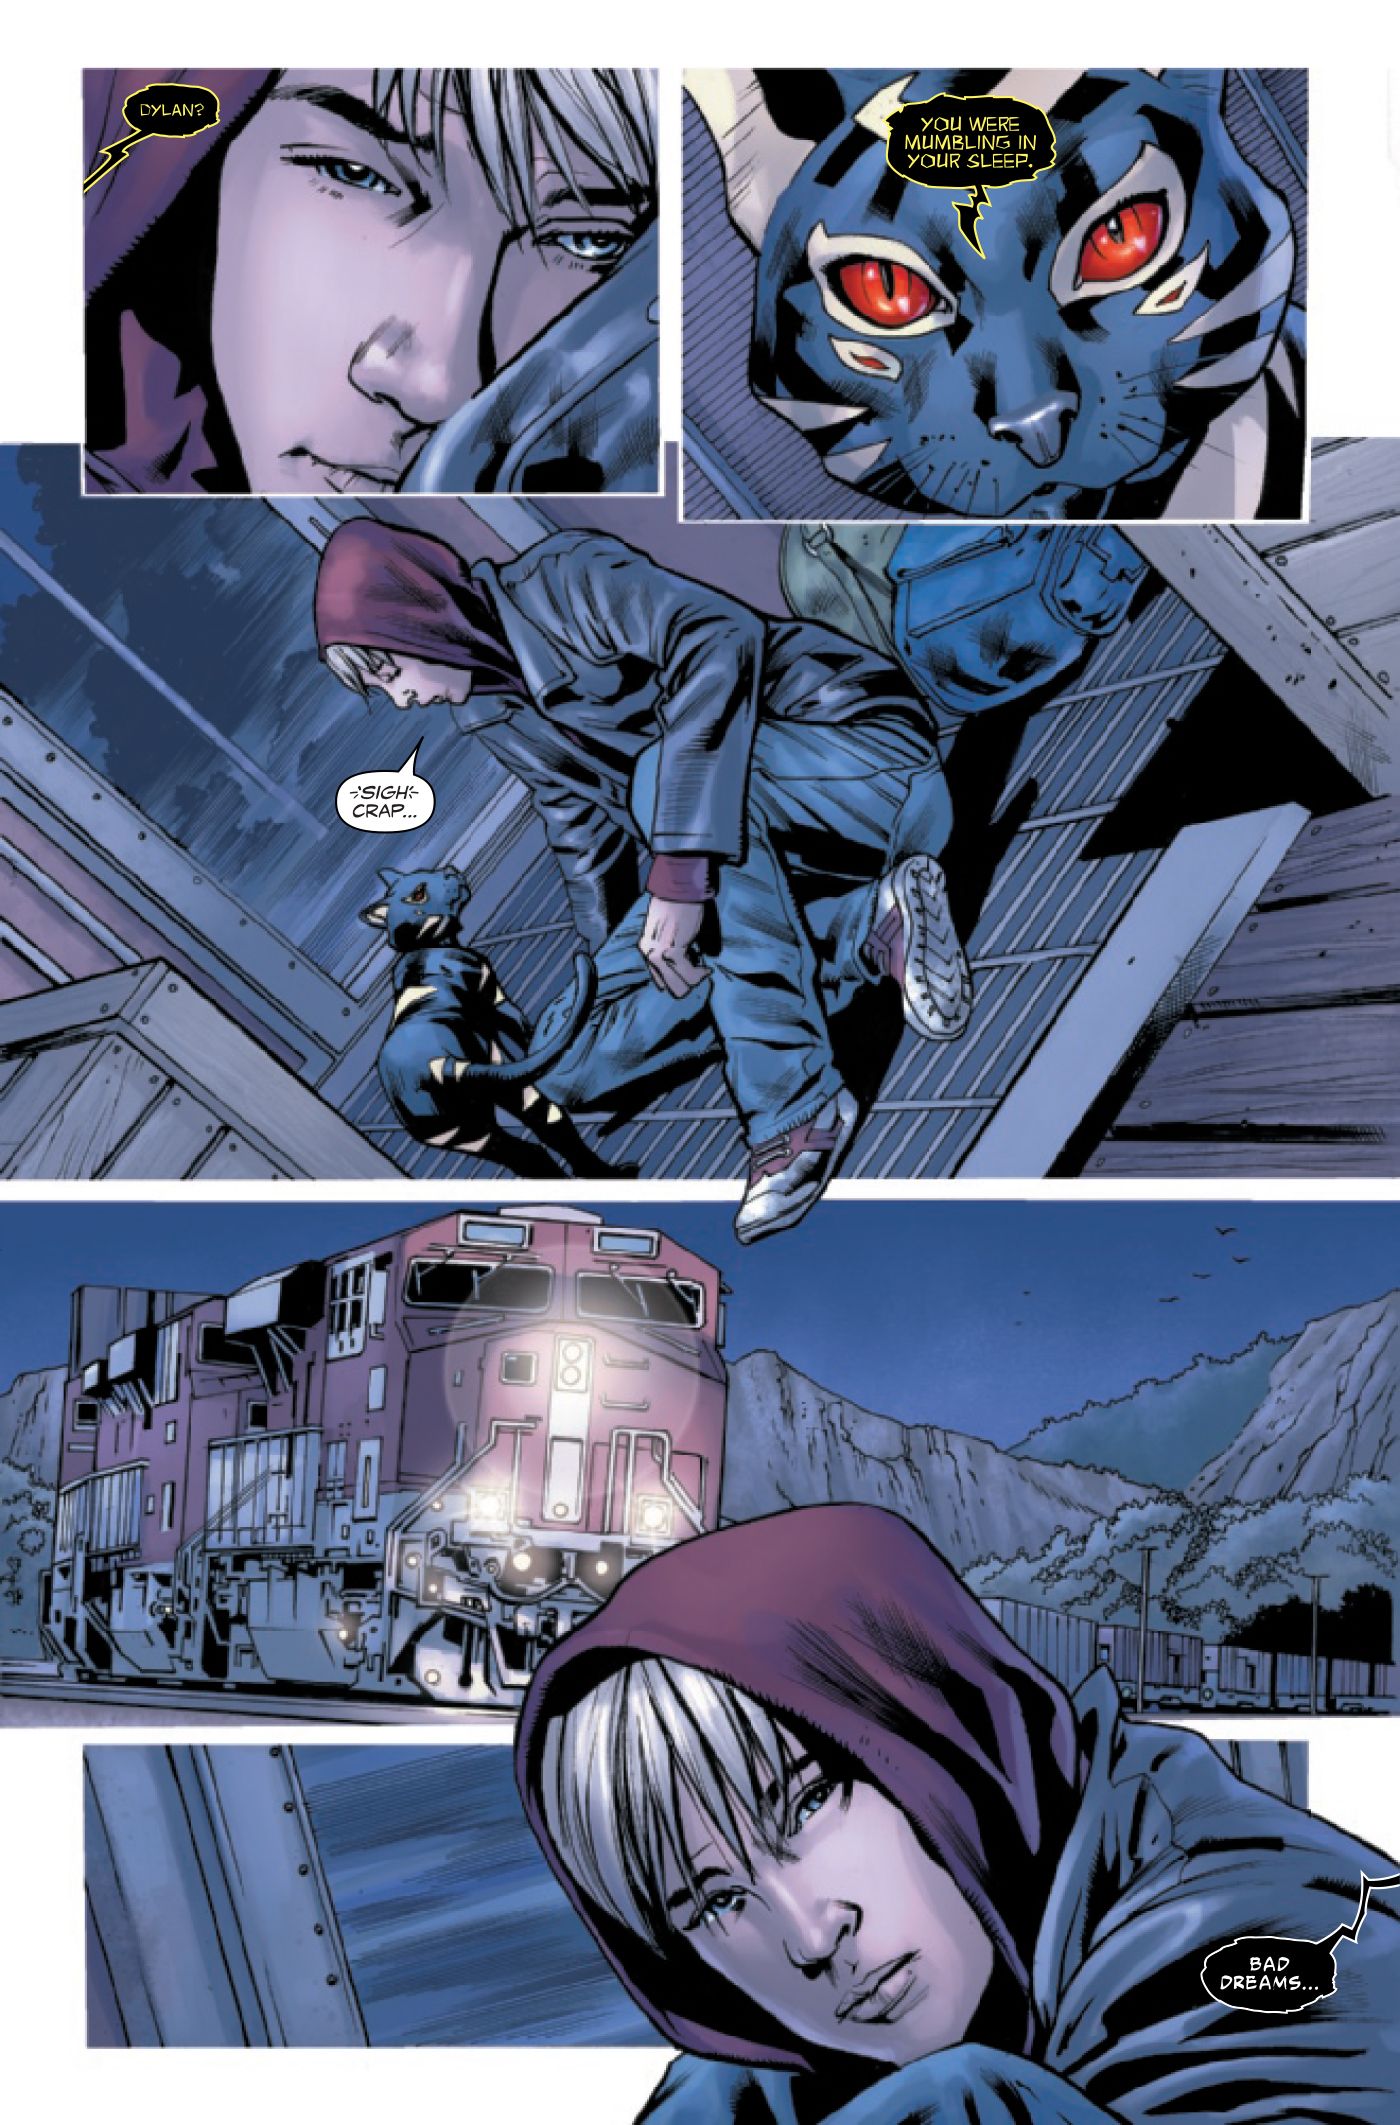 Sleeper wakes Dylan from his nightmares on a cargo train.